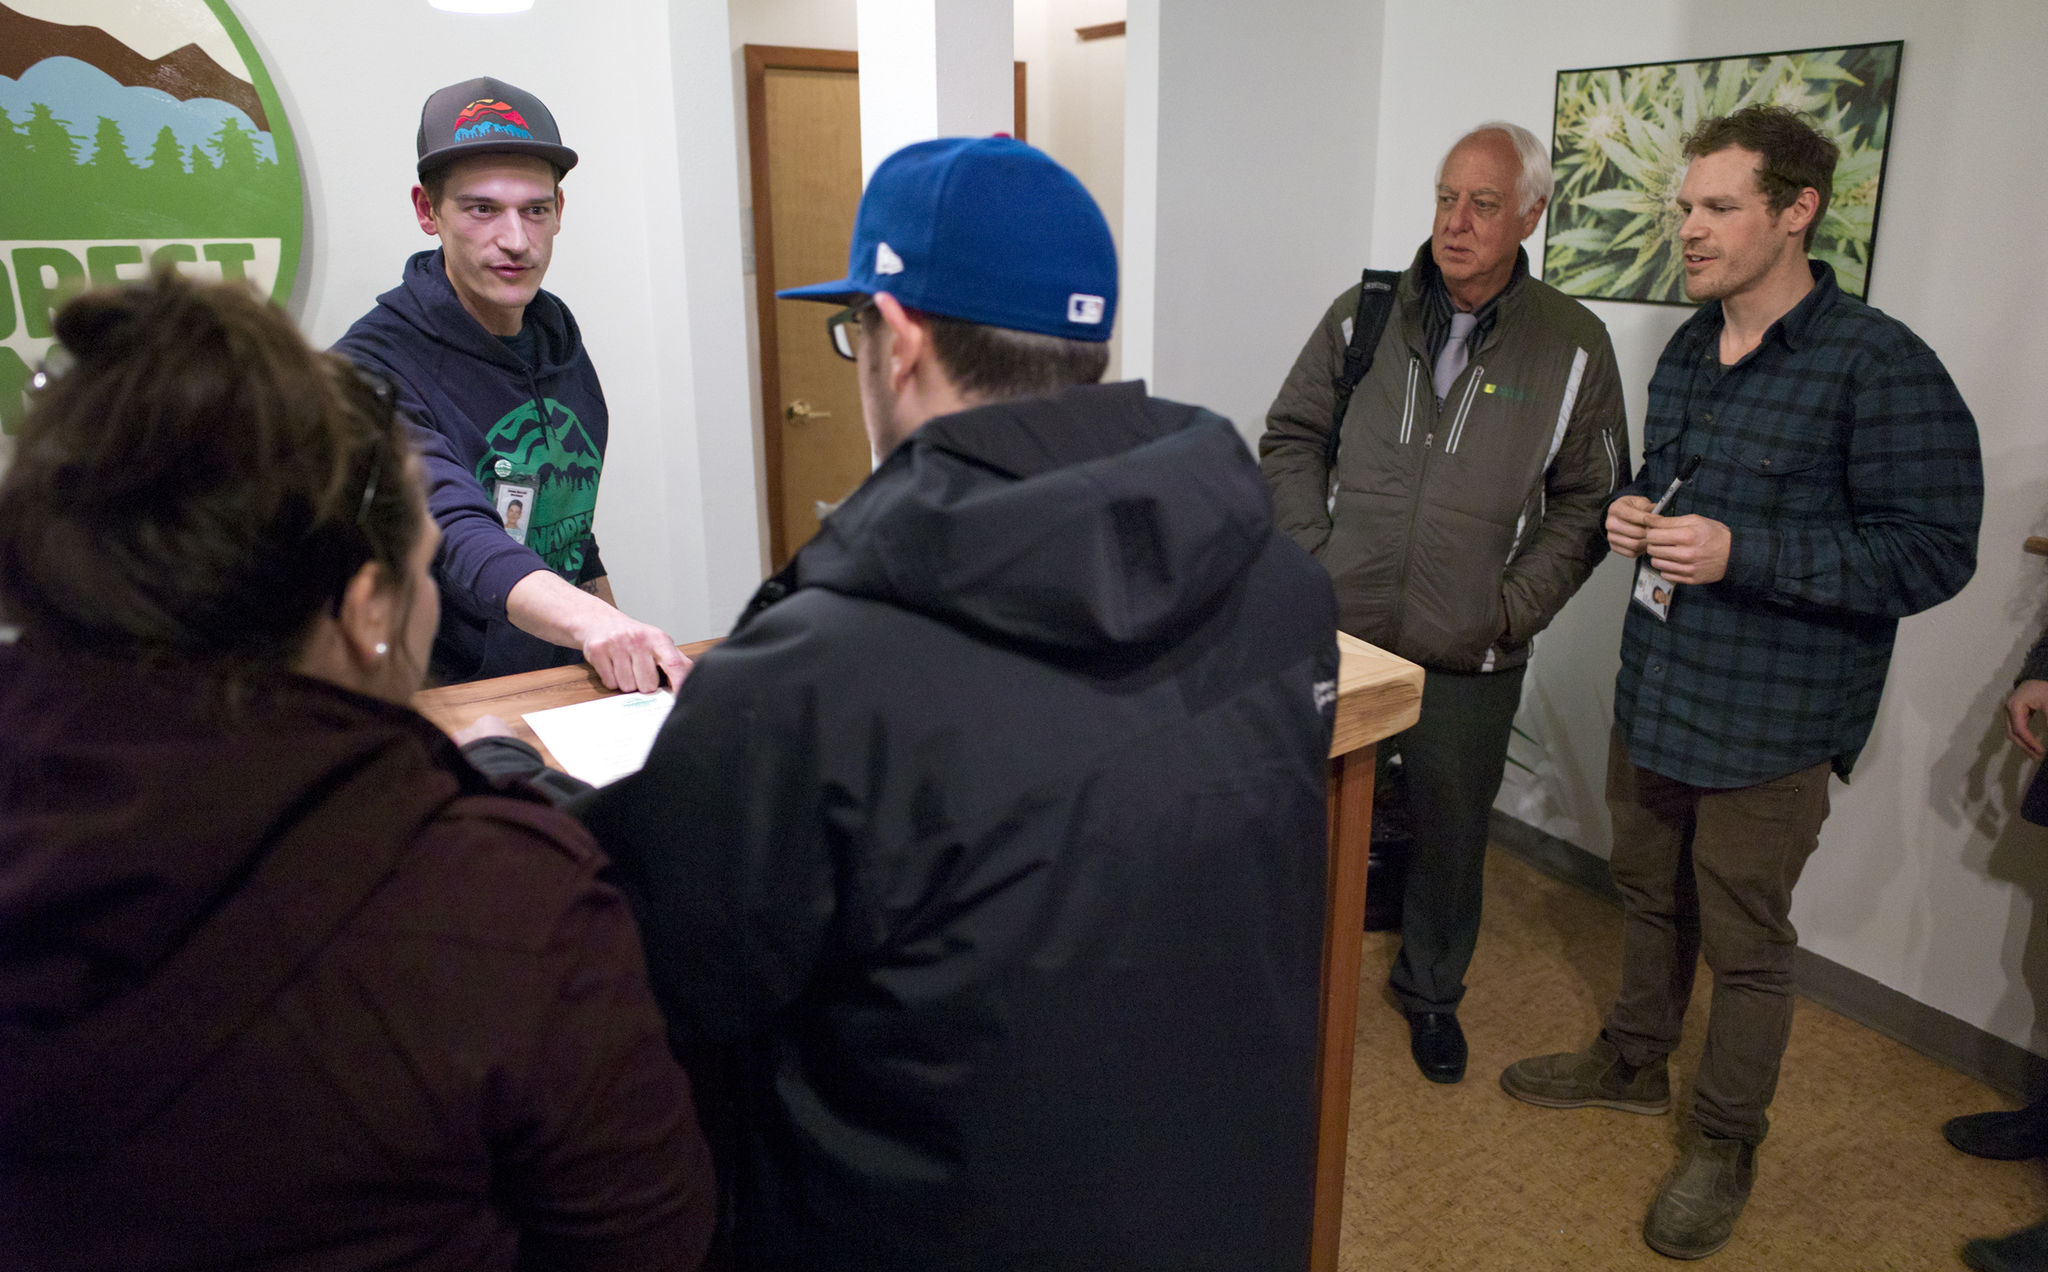 In this file photo, Juneau Mayor Ken Koelsch, center, stands and watches the first marijuana sales in the capital city with Giono Barrett, right, as James Barrett helps customers during a invitation opening of Rainforest Farms store on Nov. 23, 2016. (Michael Penn | Juneau Empire File)